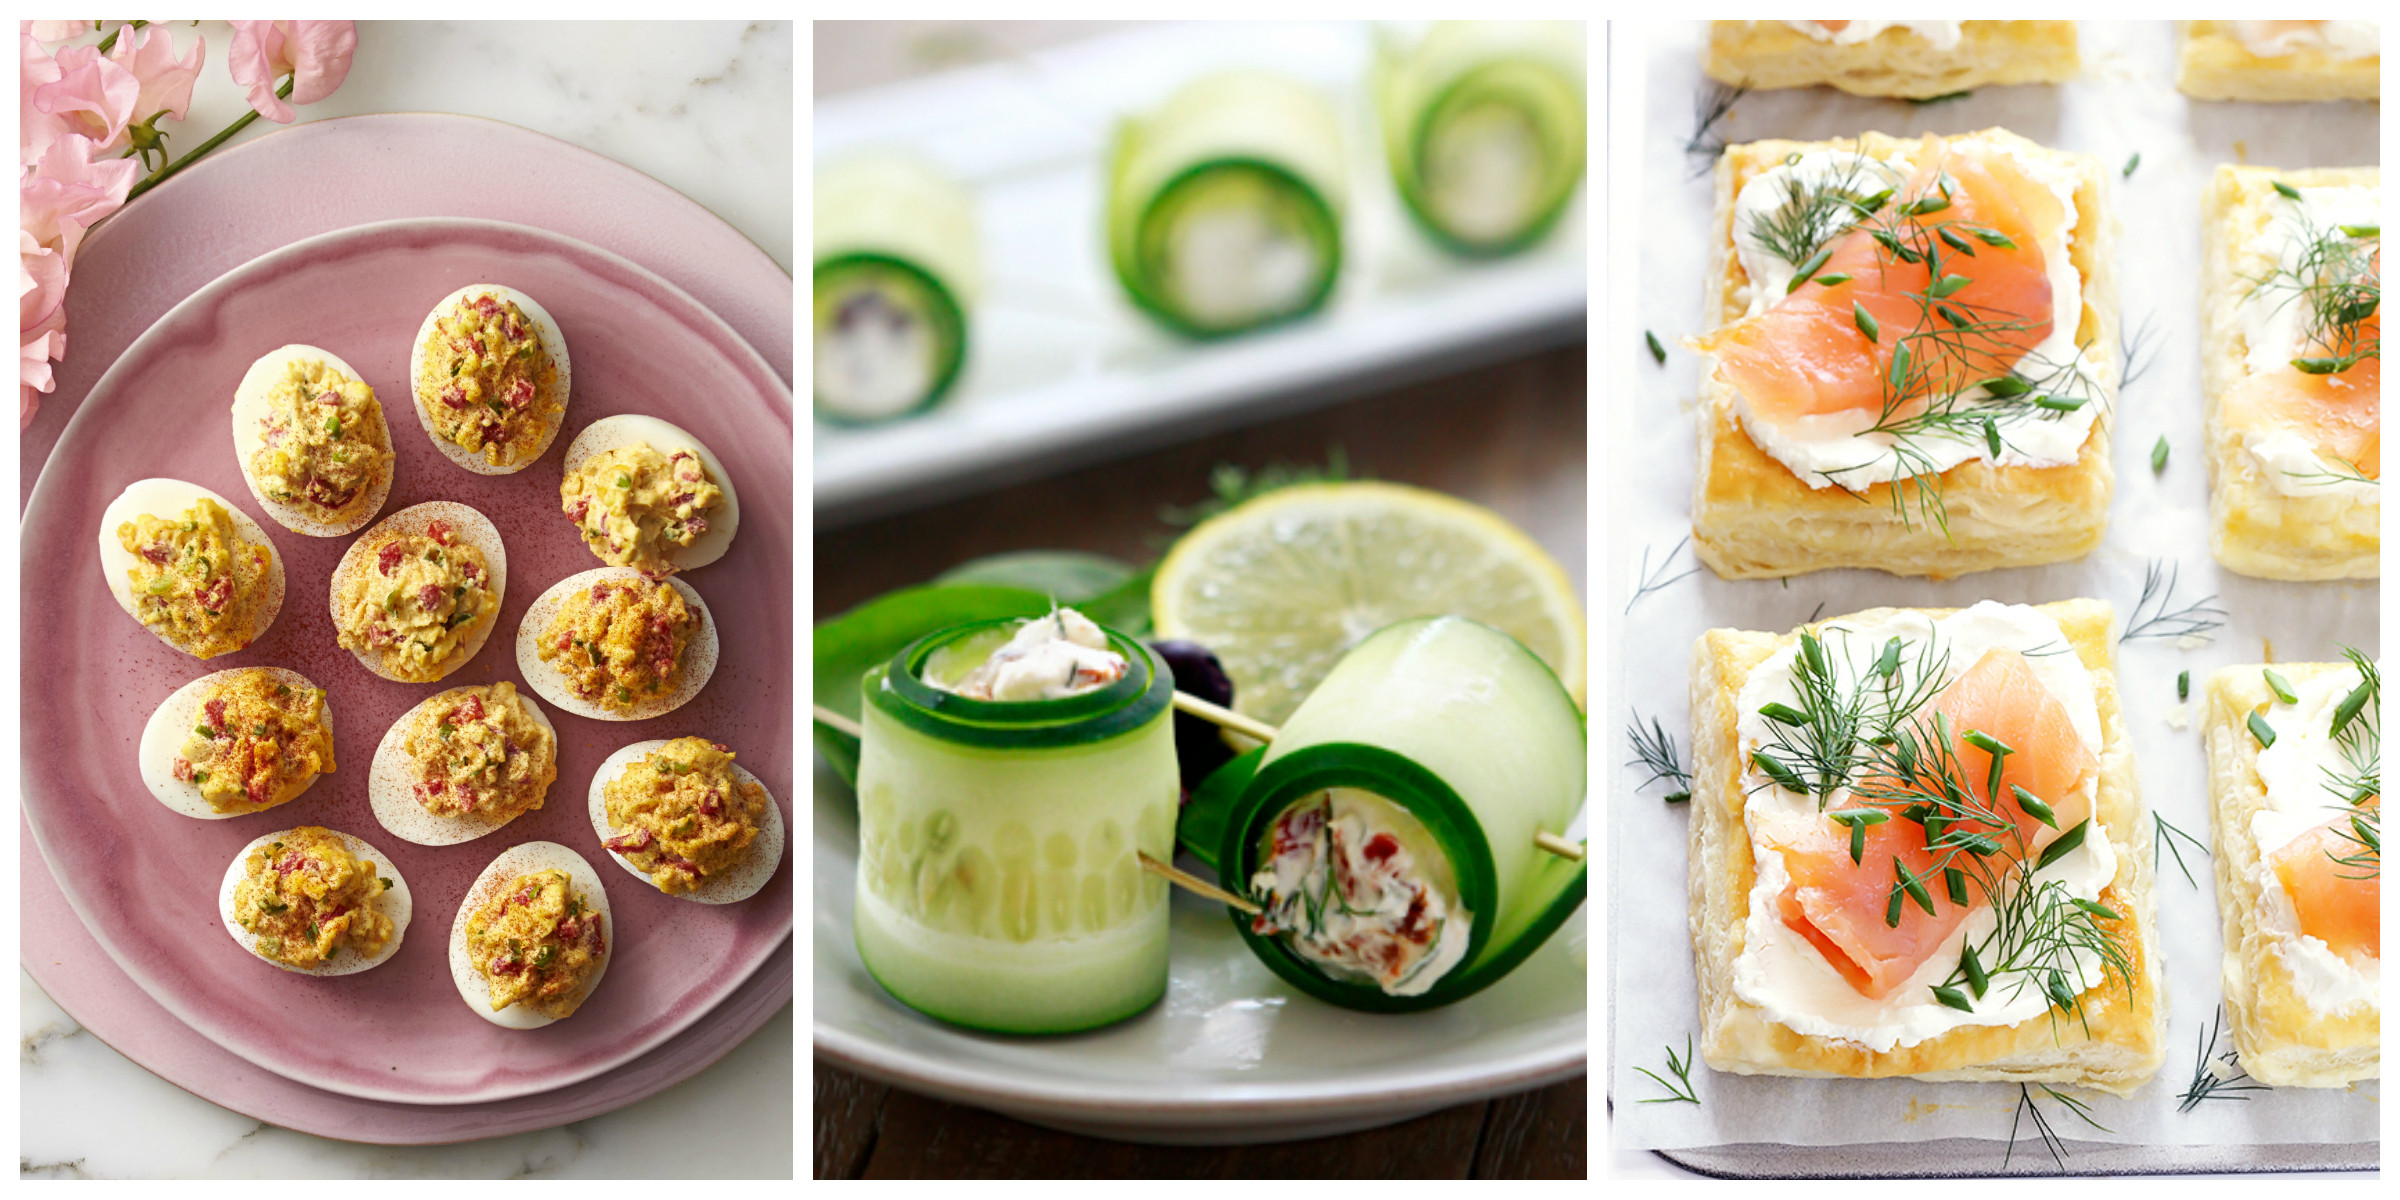 Best Easter Appetizers
 18 Easy Easter Appetizers Best Recipes for Easter Hors D